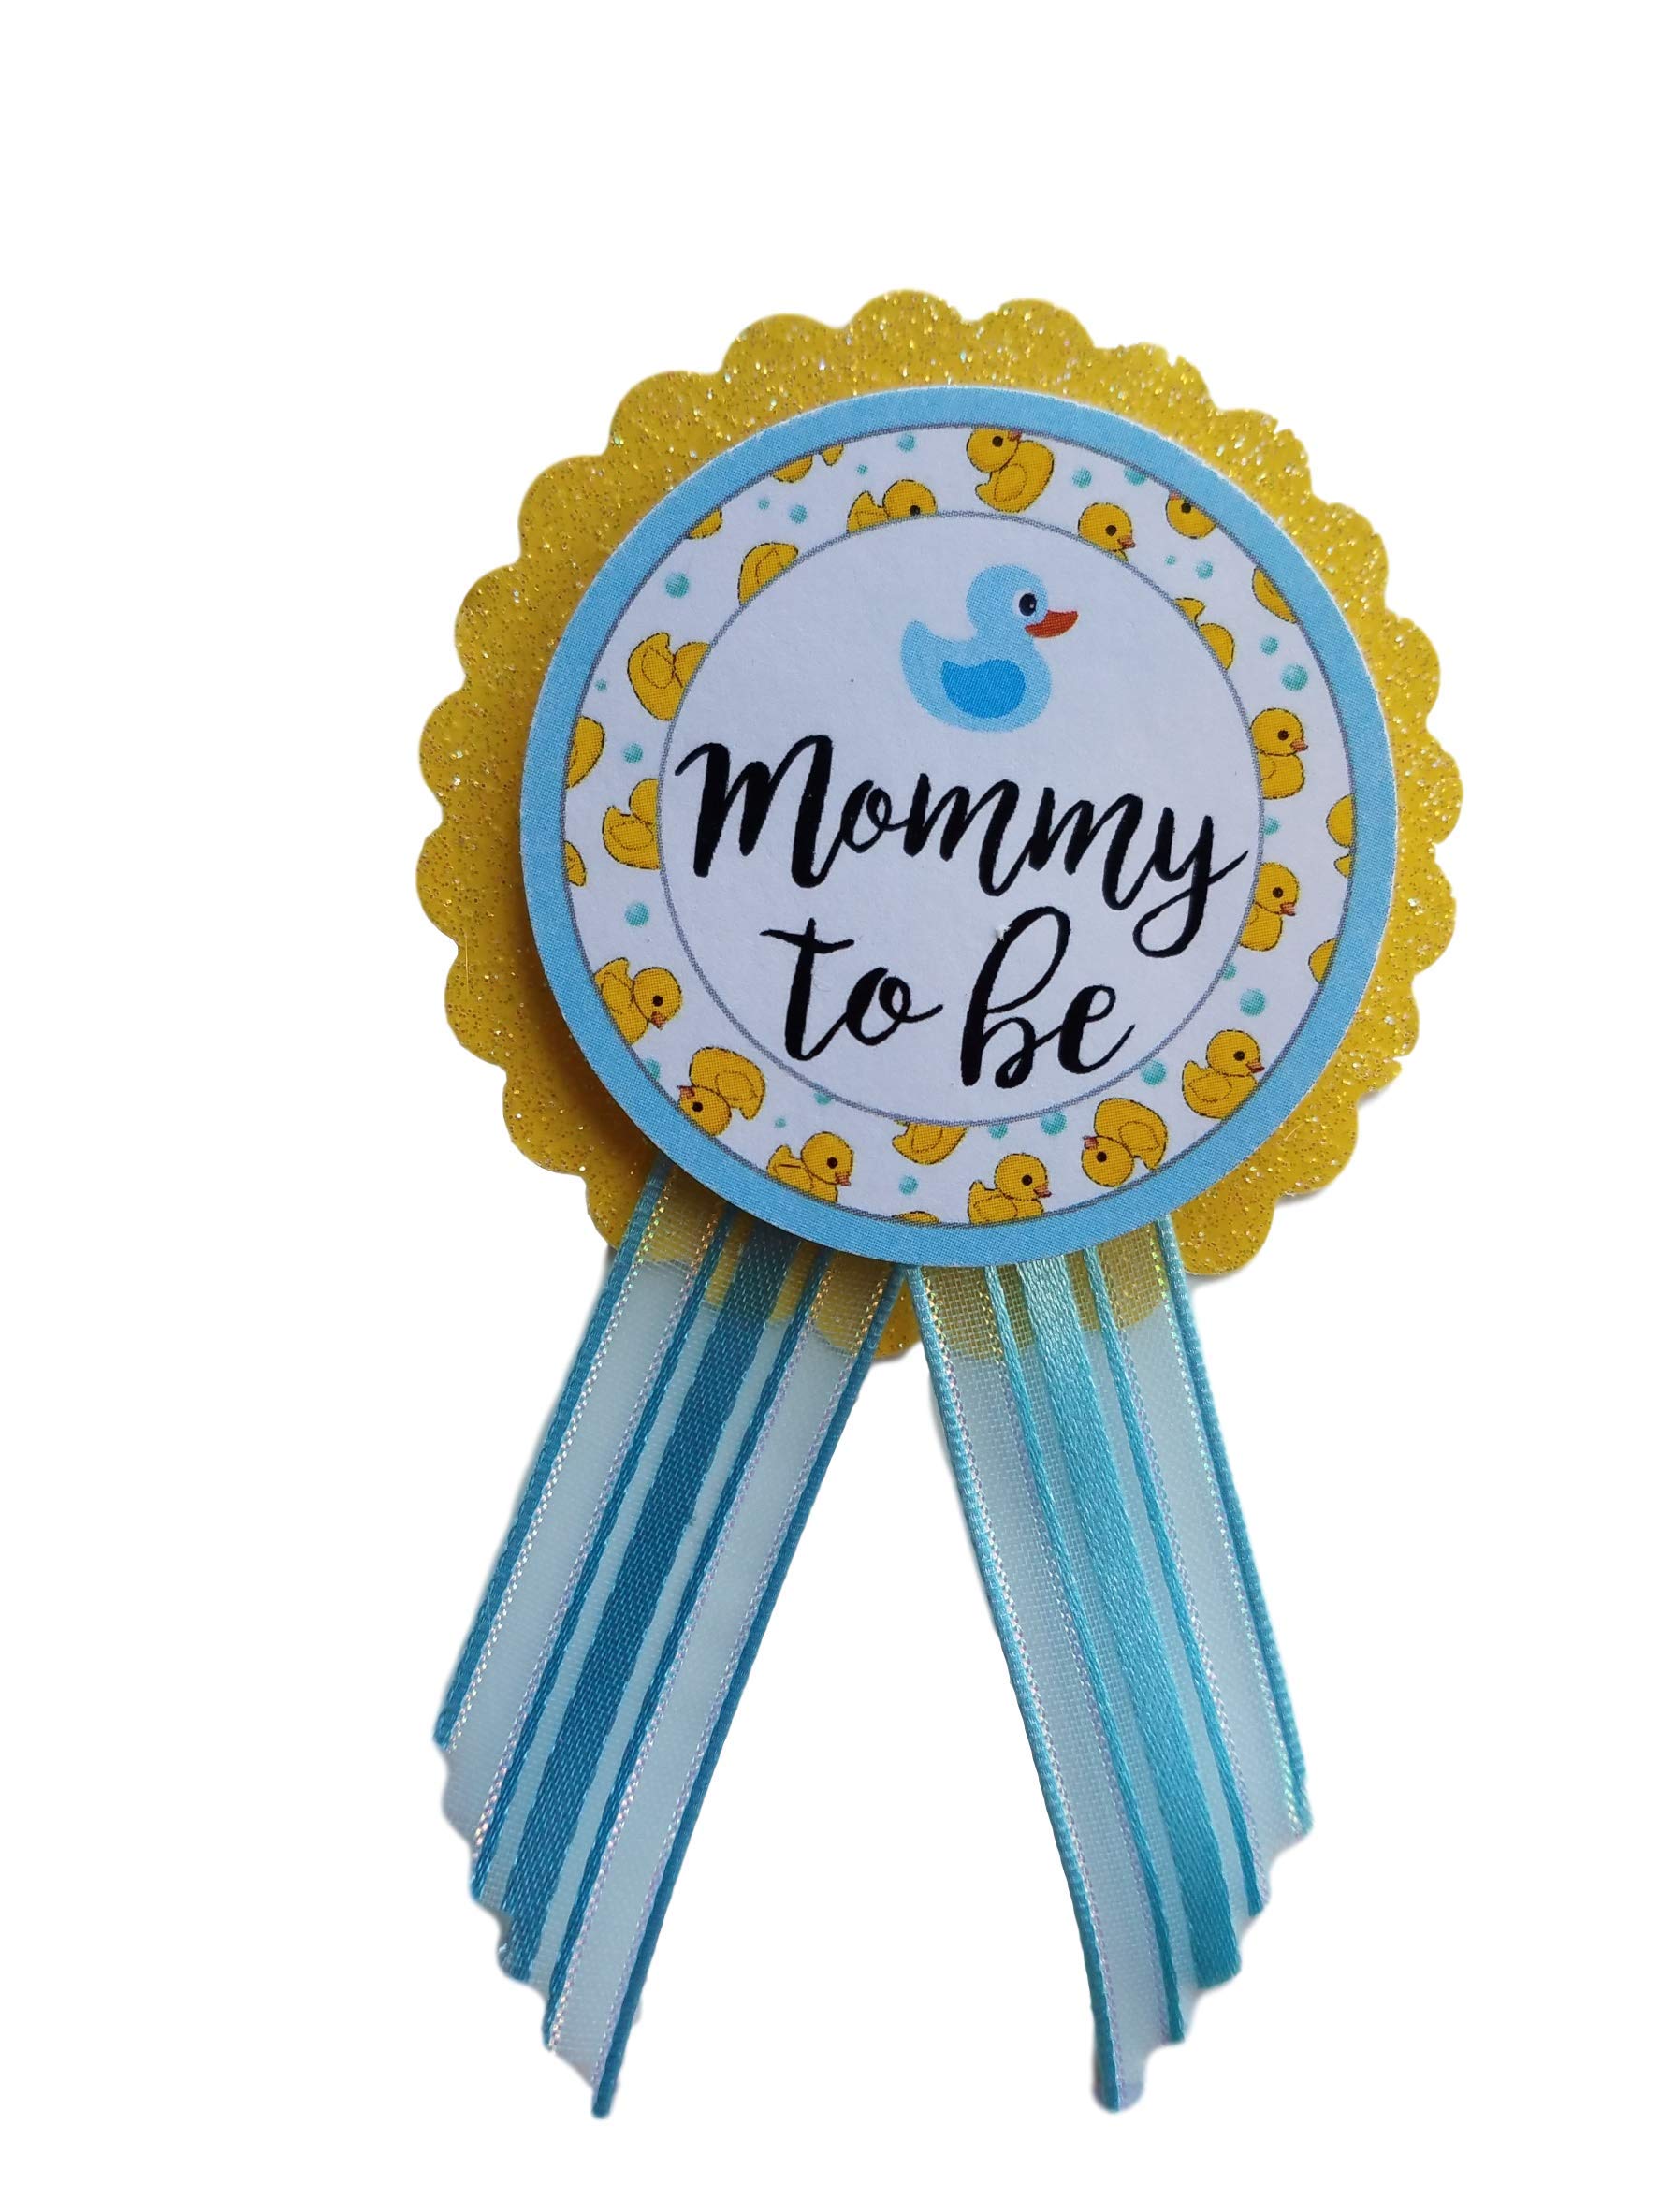 Amy's Bubbling Boutique, Inc. Mommy & Daddy to Be Pin Duck Baby Shower Yellow & Blue It's a Boy, Baby Sprinkle Gender Reveal